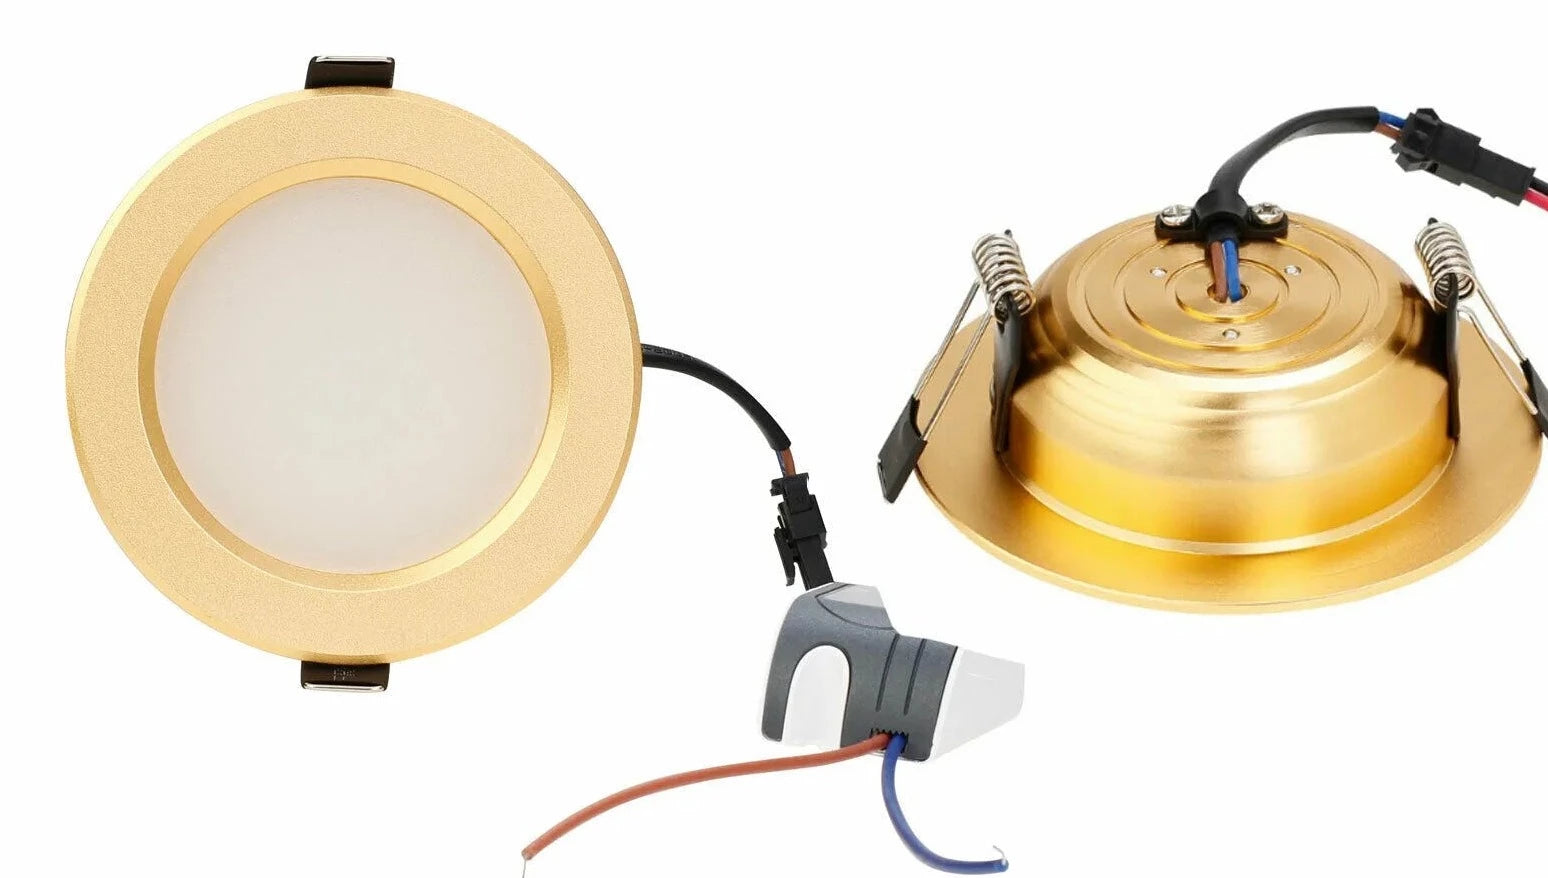 3W 5W 7W 9W 12W Golden LED Recessed Ceiling Light Fixture Downlight Lamp + Driver Spotlight  Lighting For Home Office Decoration